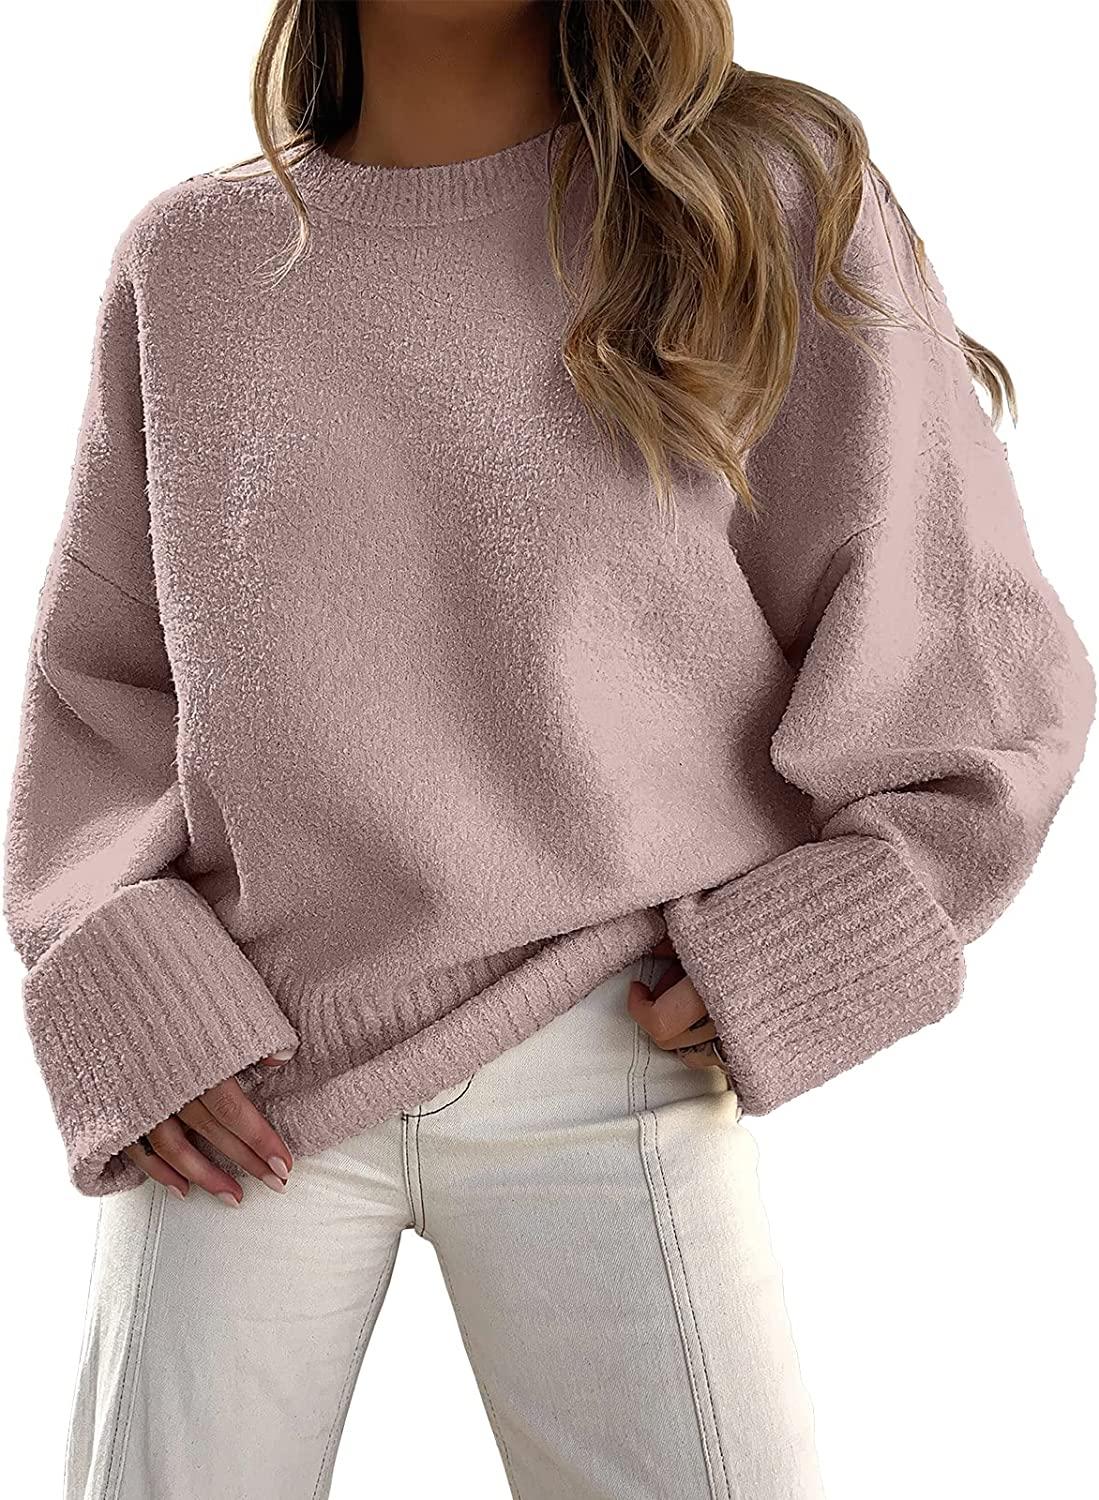 Women's Fuzzy Knit Long Sleeve Sweater by ANRABESS - Fall Fashion, Crew  Neck, Loose Fit, Chunky Knit, Warm Cashmere Pullover at  Women's  Clothing store